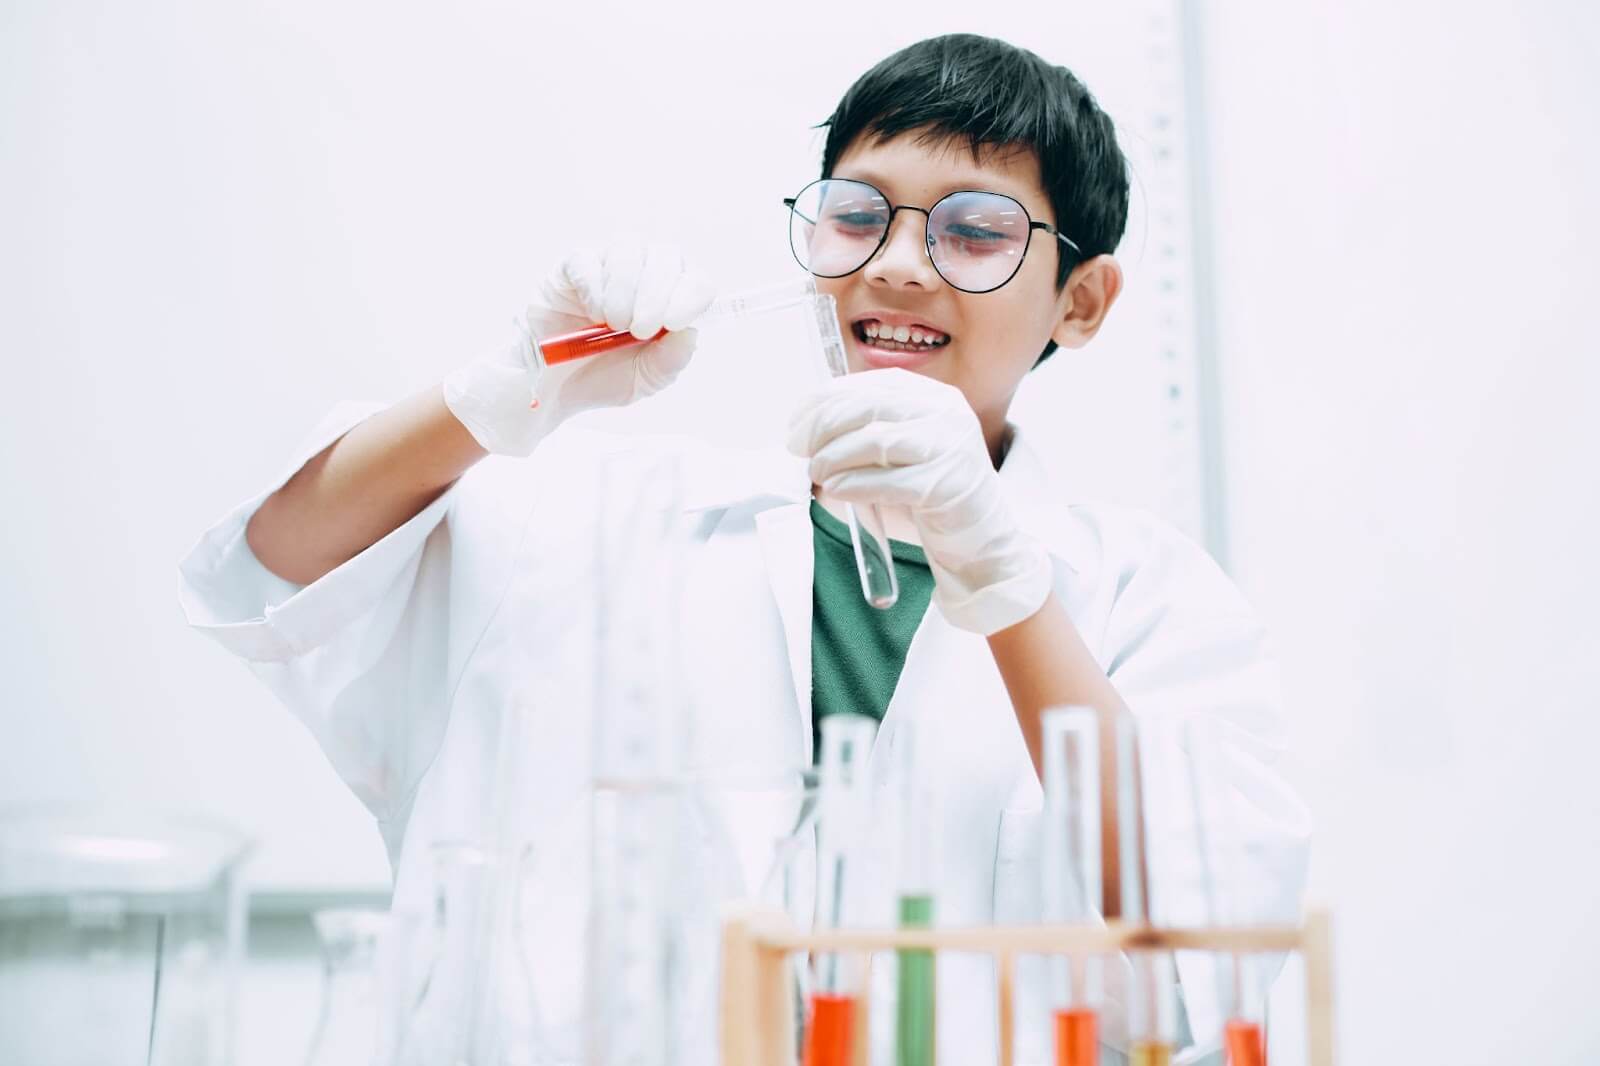 Secondary School Biology, Chemistry or Physics: Which to Take?